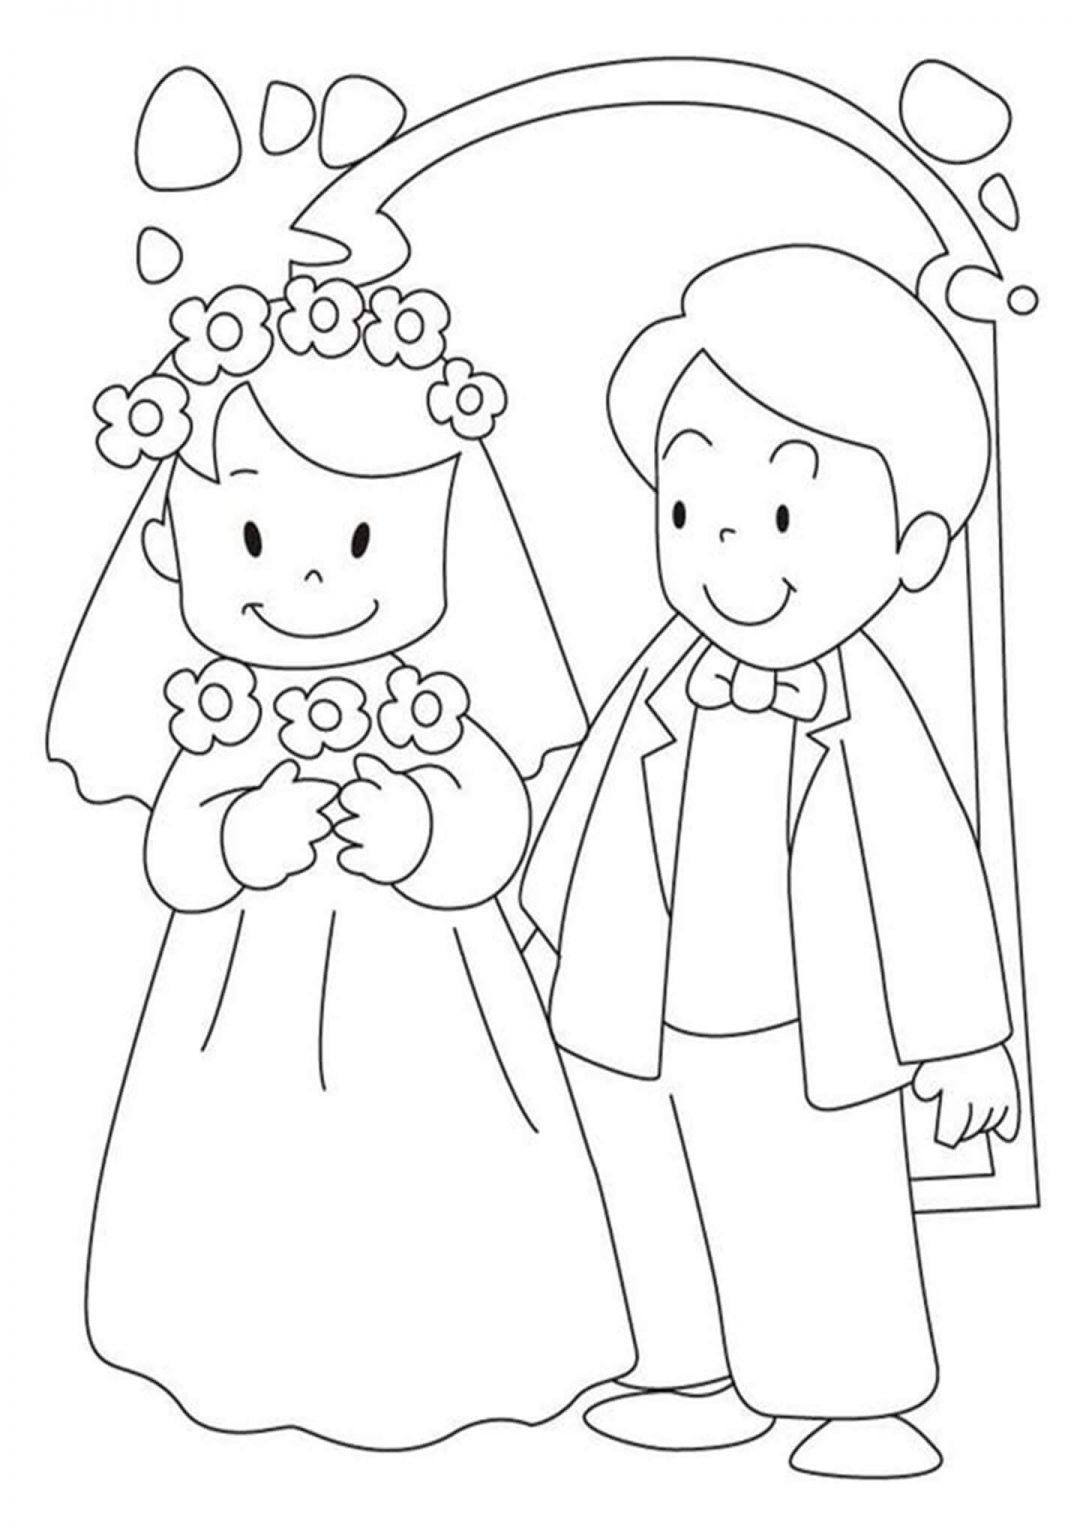 free-easy-to-print-wedding-coloring-pages-tulamama